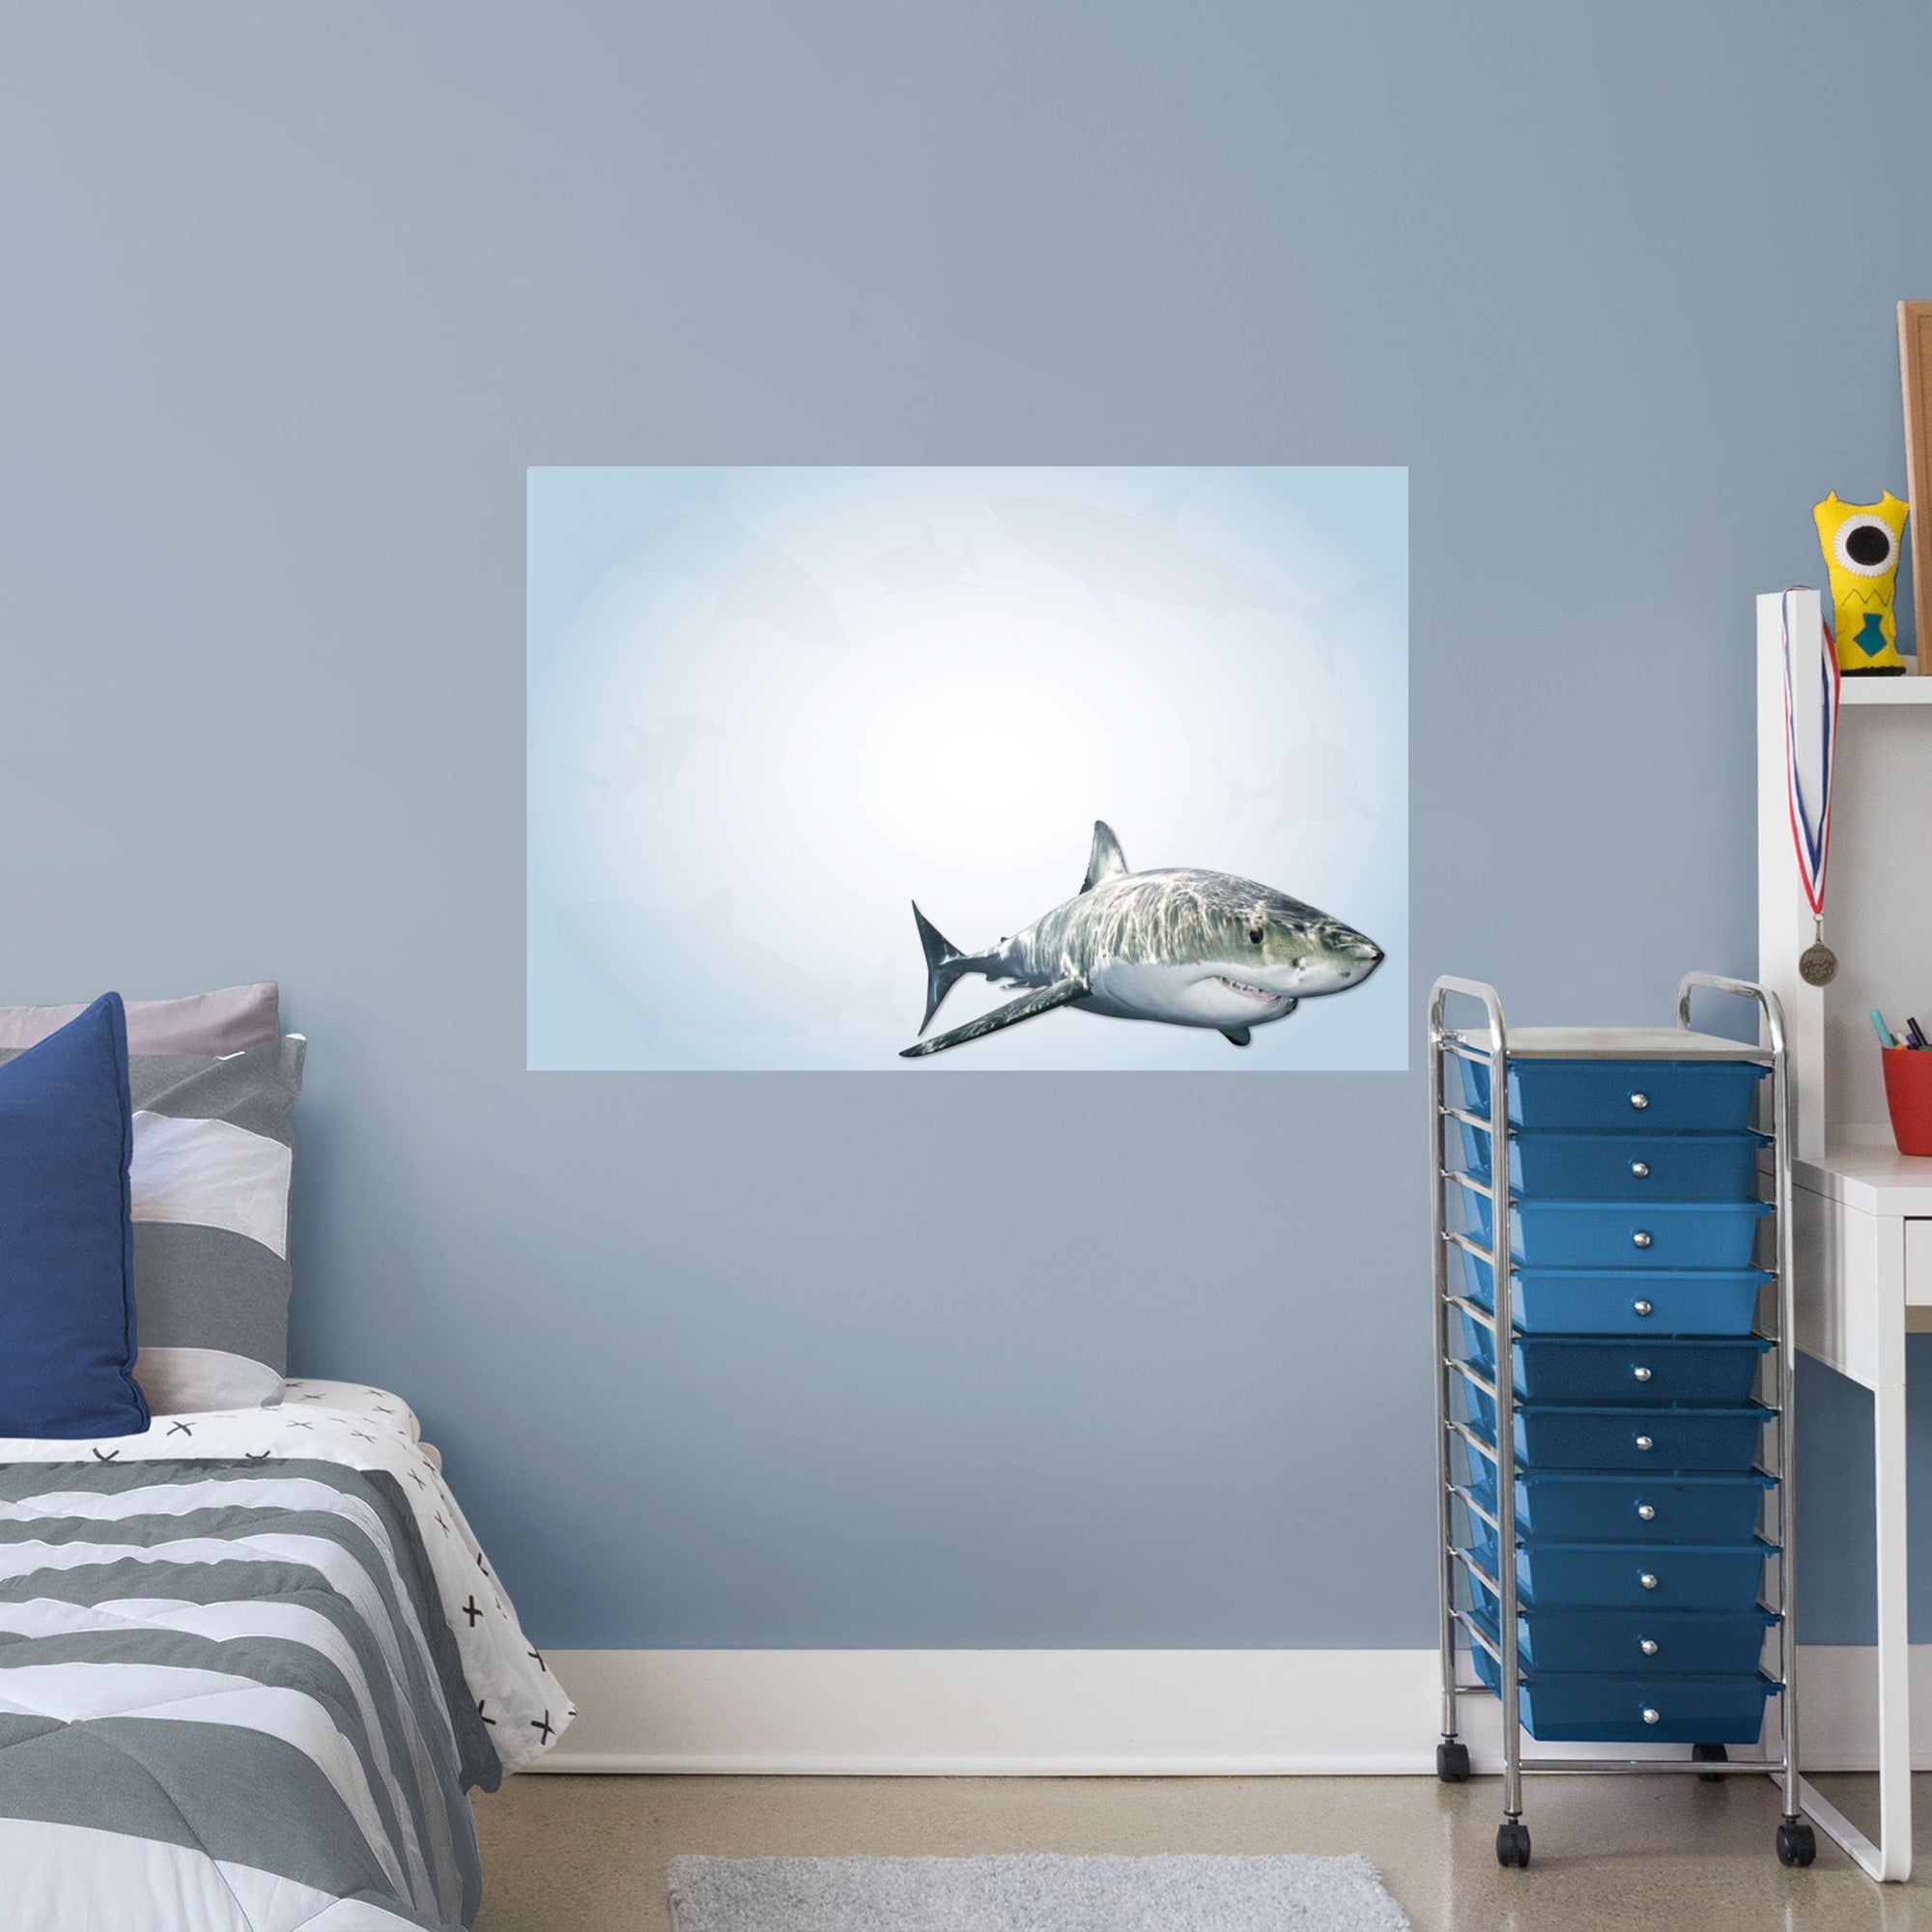 Whiteboard: Shark - Removable Dry Erase Vinyl Decal 38.0"W x 26.0"H by Fathead